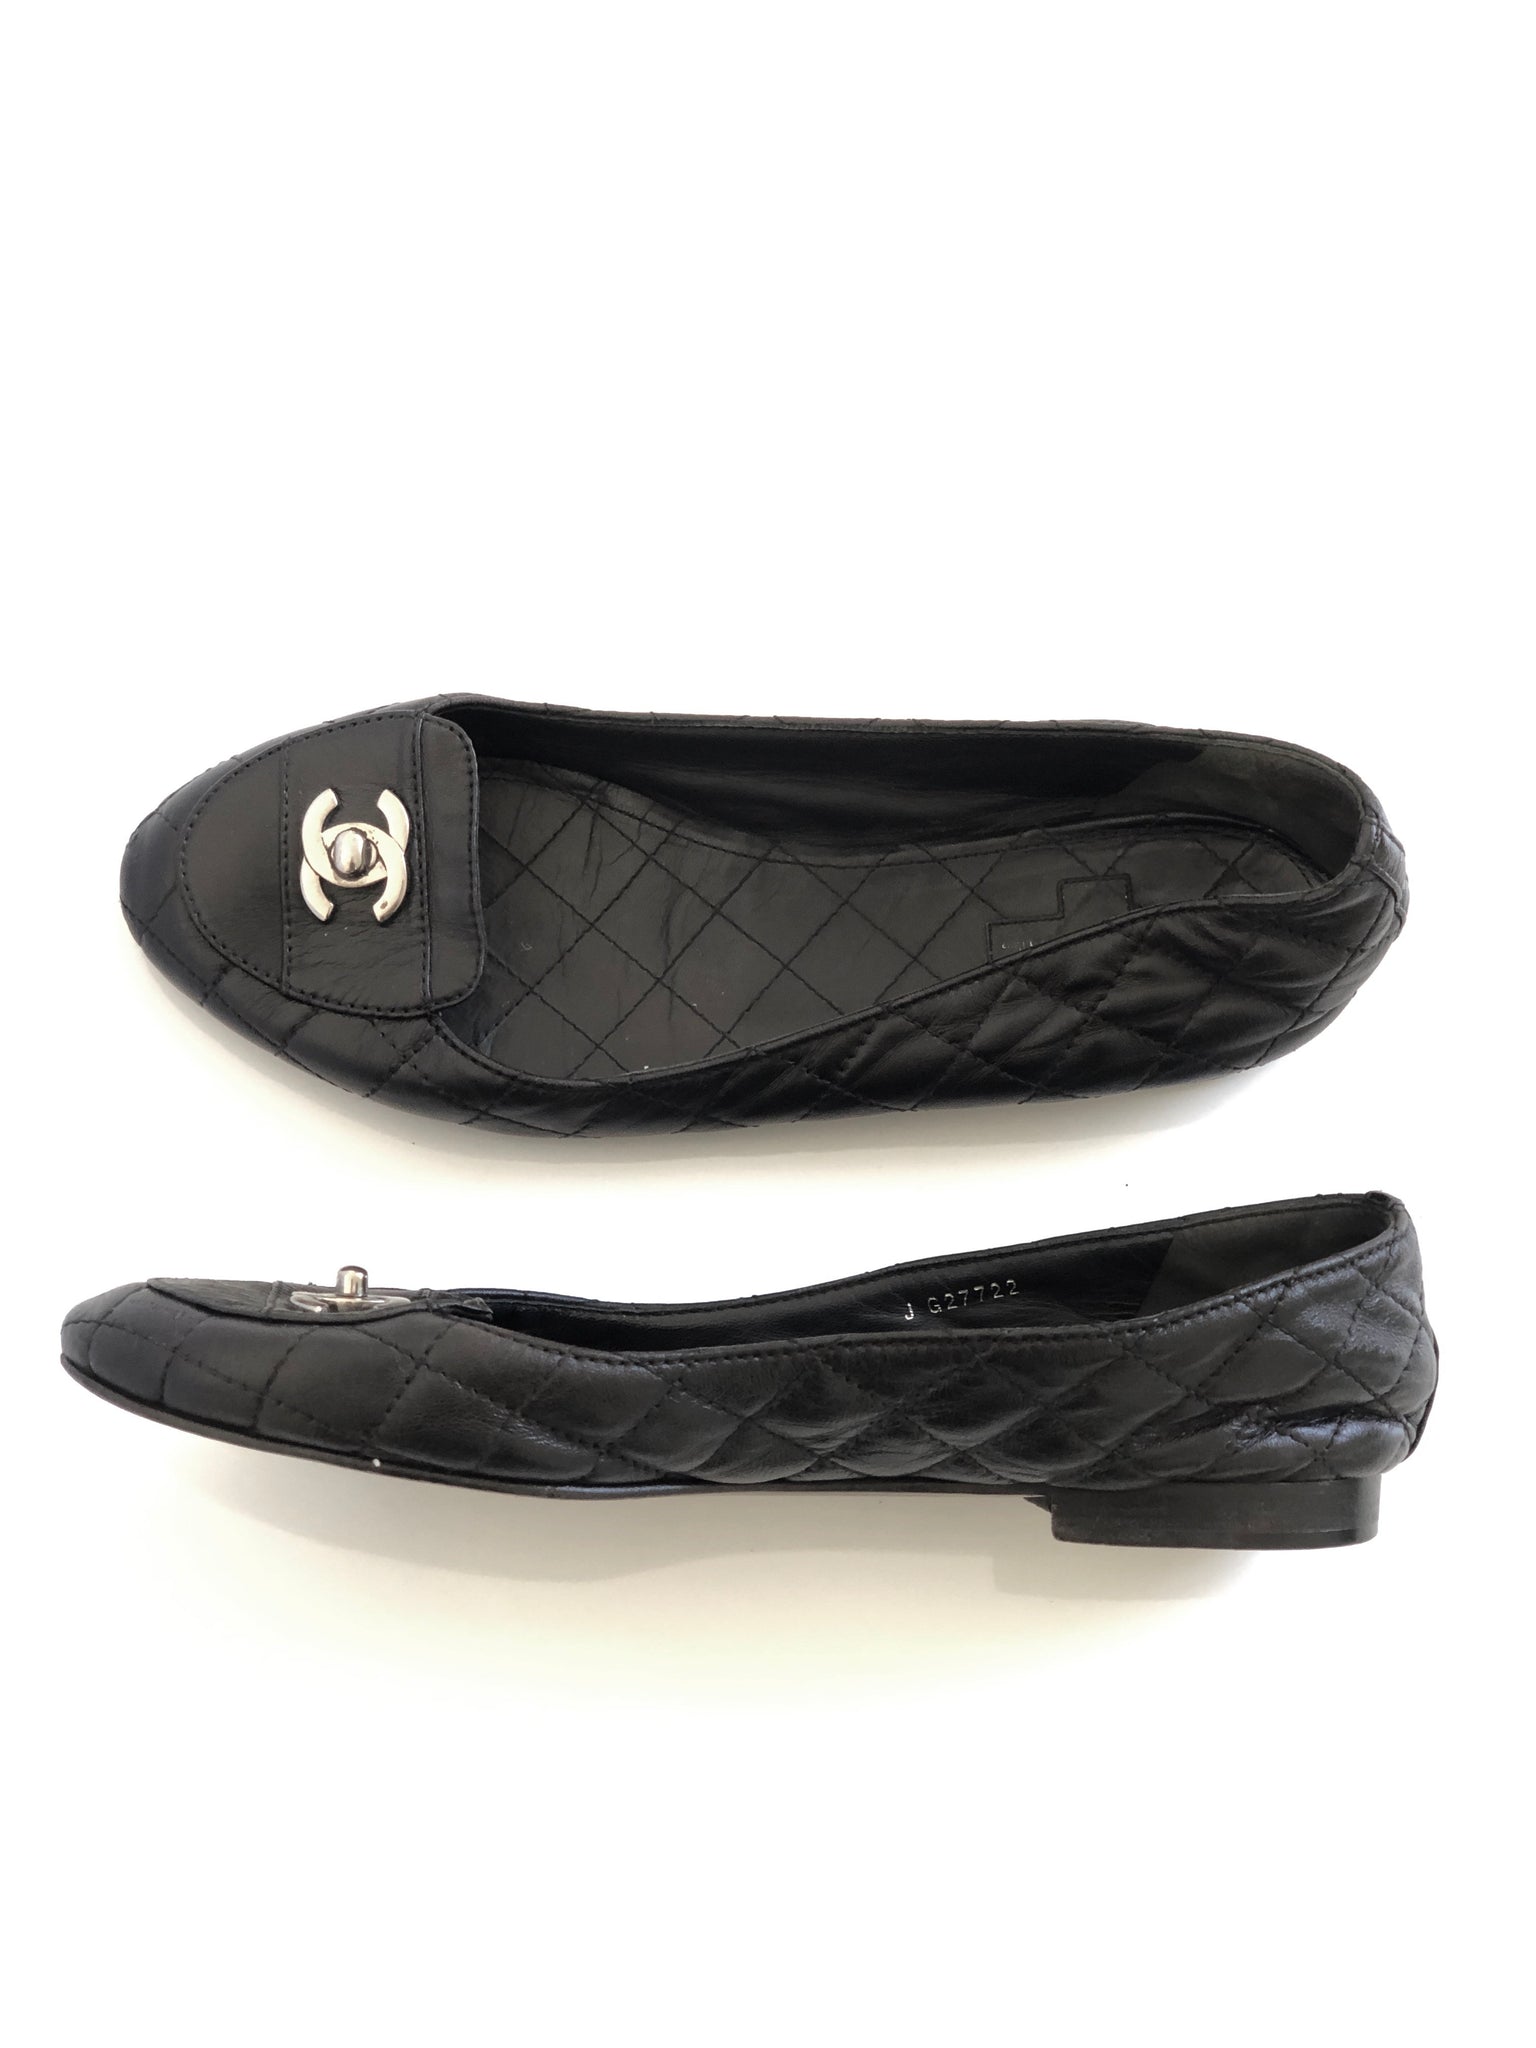 Chanel Vintage Loafers  Chanel loafers, Chanel shoes, Fashion shoes